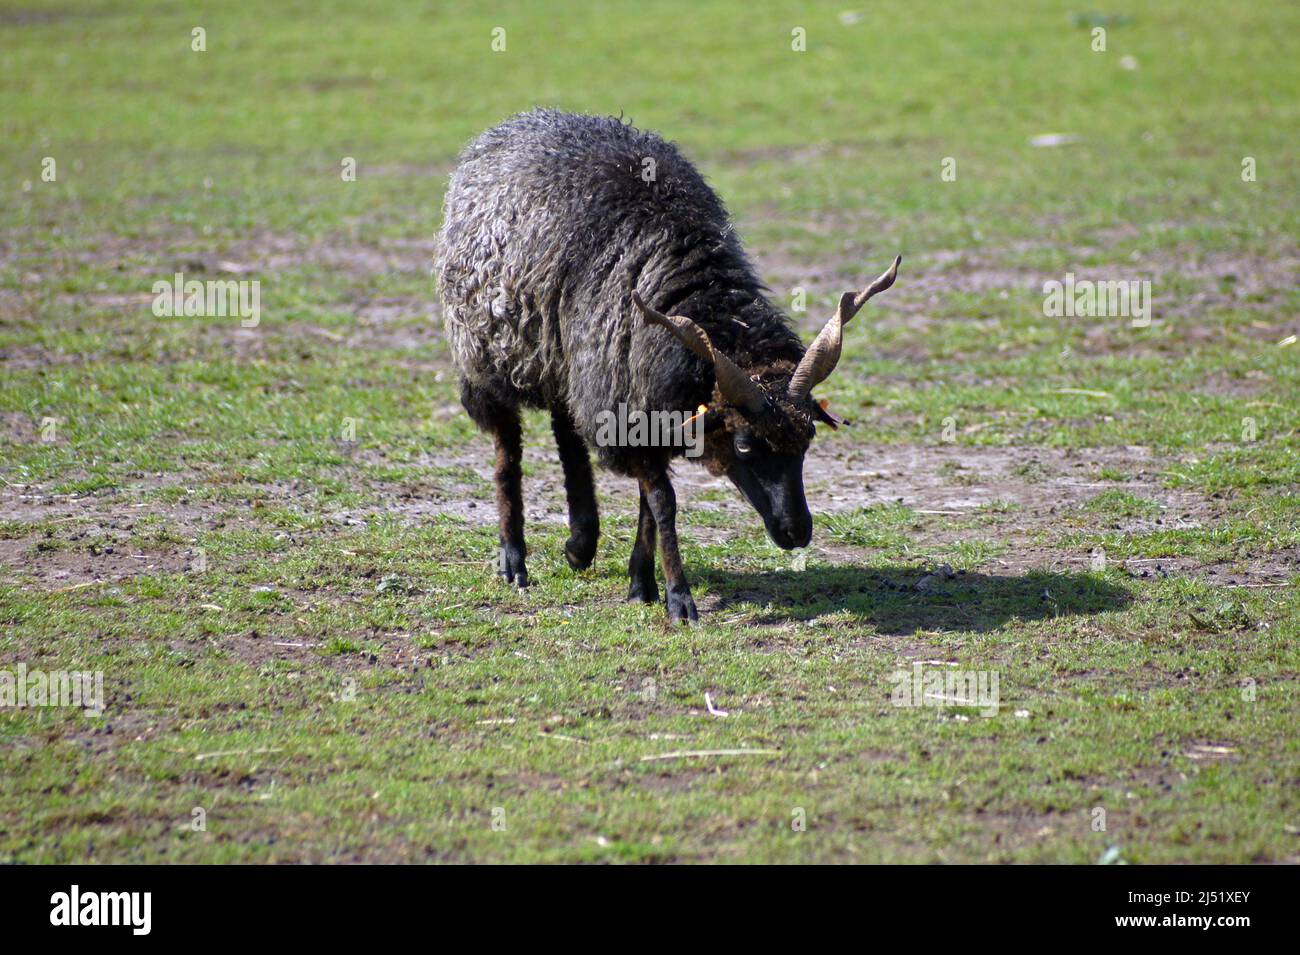 Racka sheep.Symbol of Hungary. Currently a rare breed due to low milk production. It's famous for the spiraling horns worn by both. Extremely durable Stock Photo